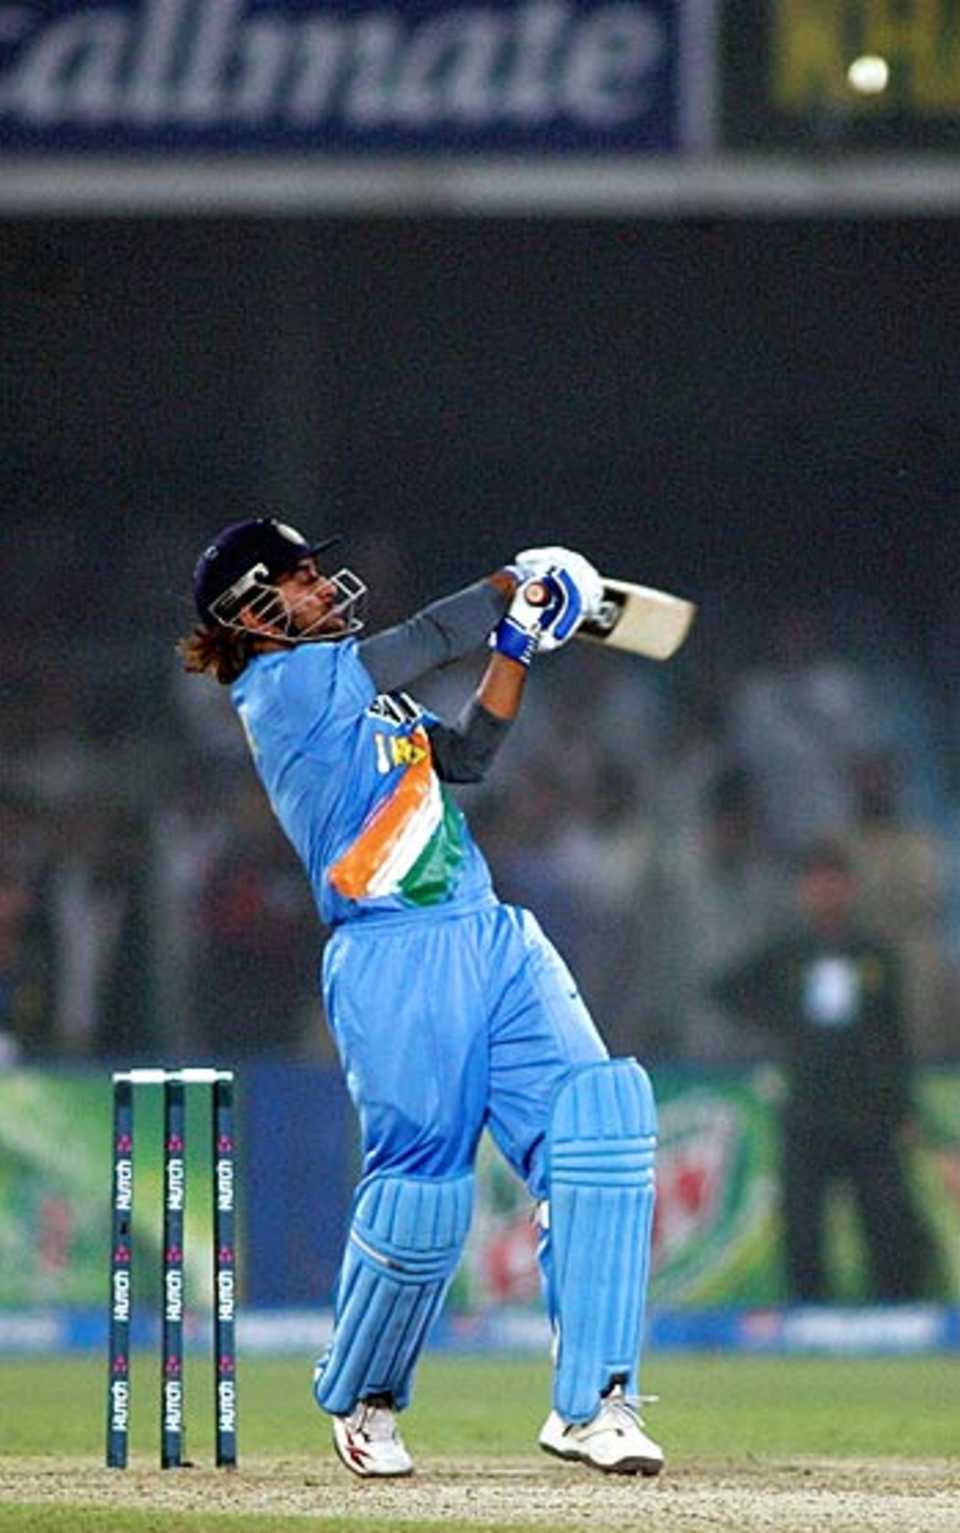 Mahendra Singh Dhoni pounded 72 from 46 balls as India cantered home, Pakistan v India, 3rd ODI, Lahore, February 13, 2006